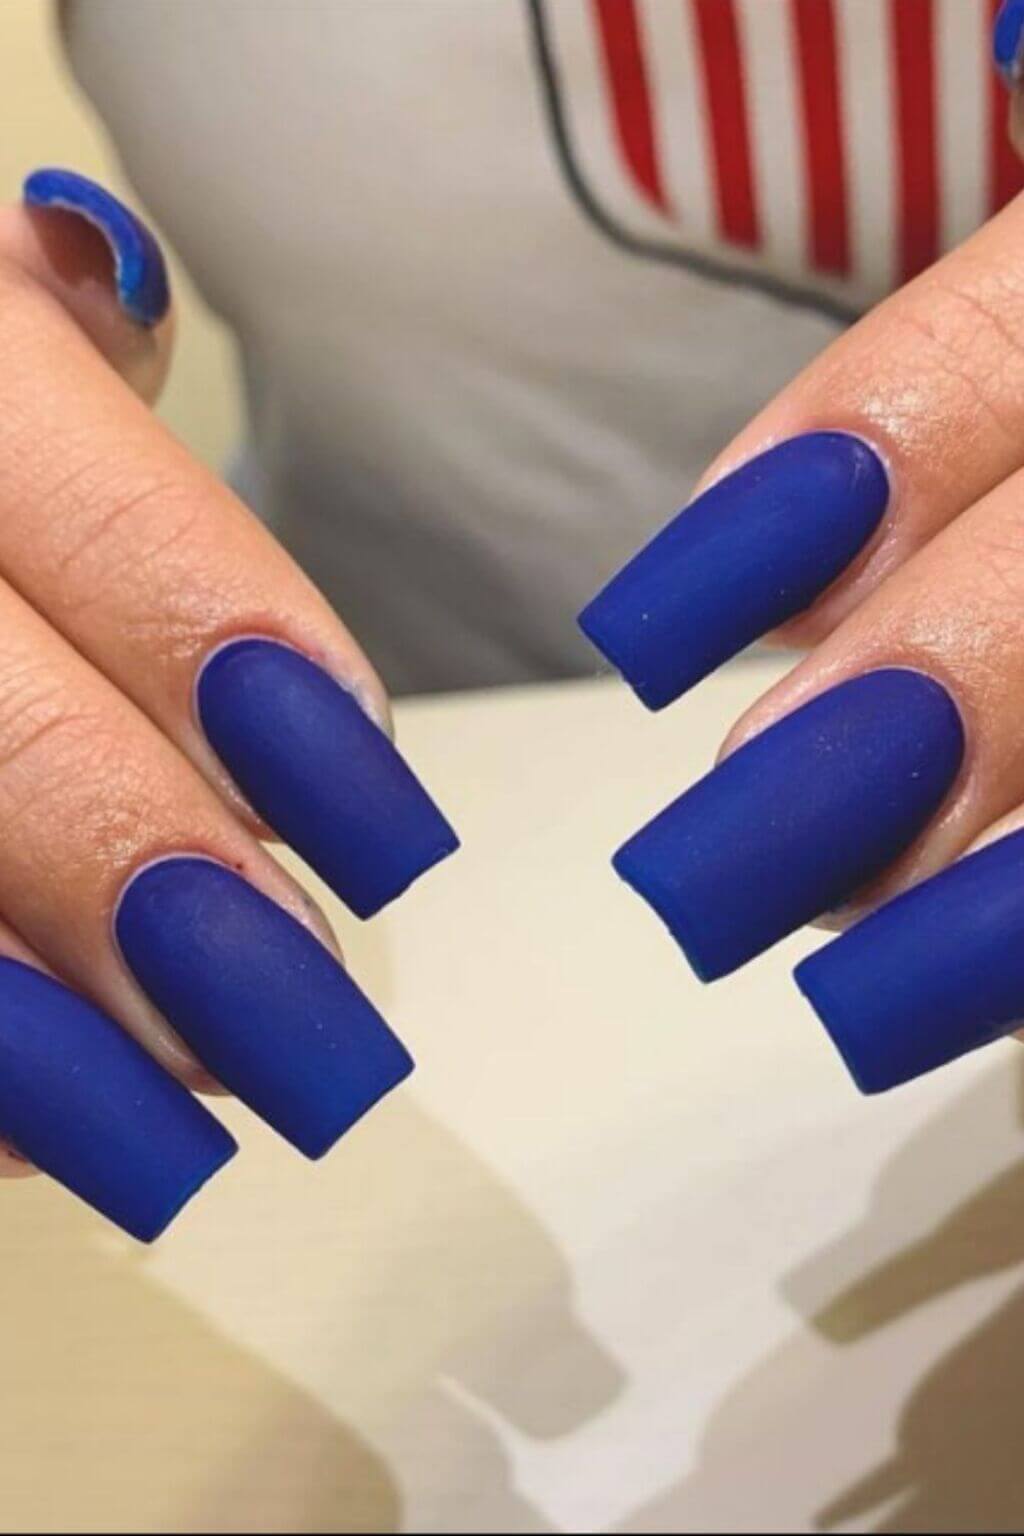 Acrylic Coffin Nails in Matte Blue